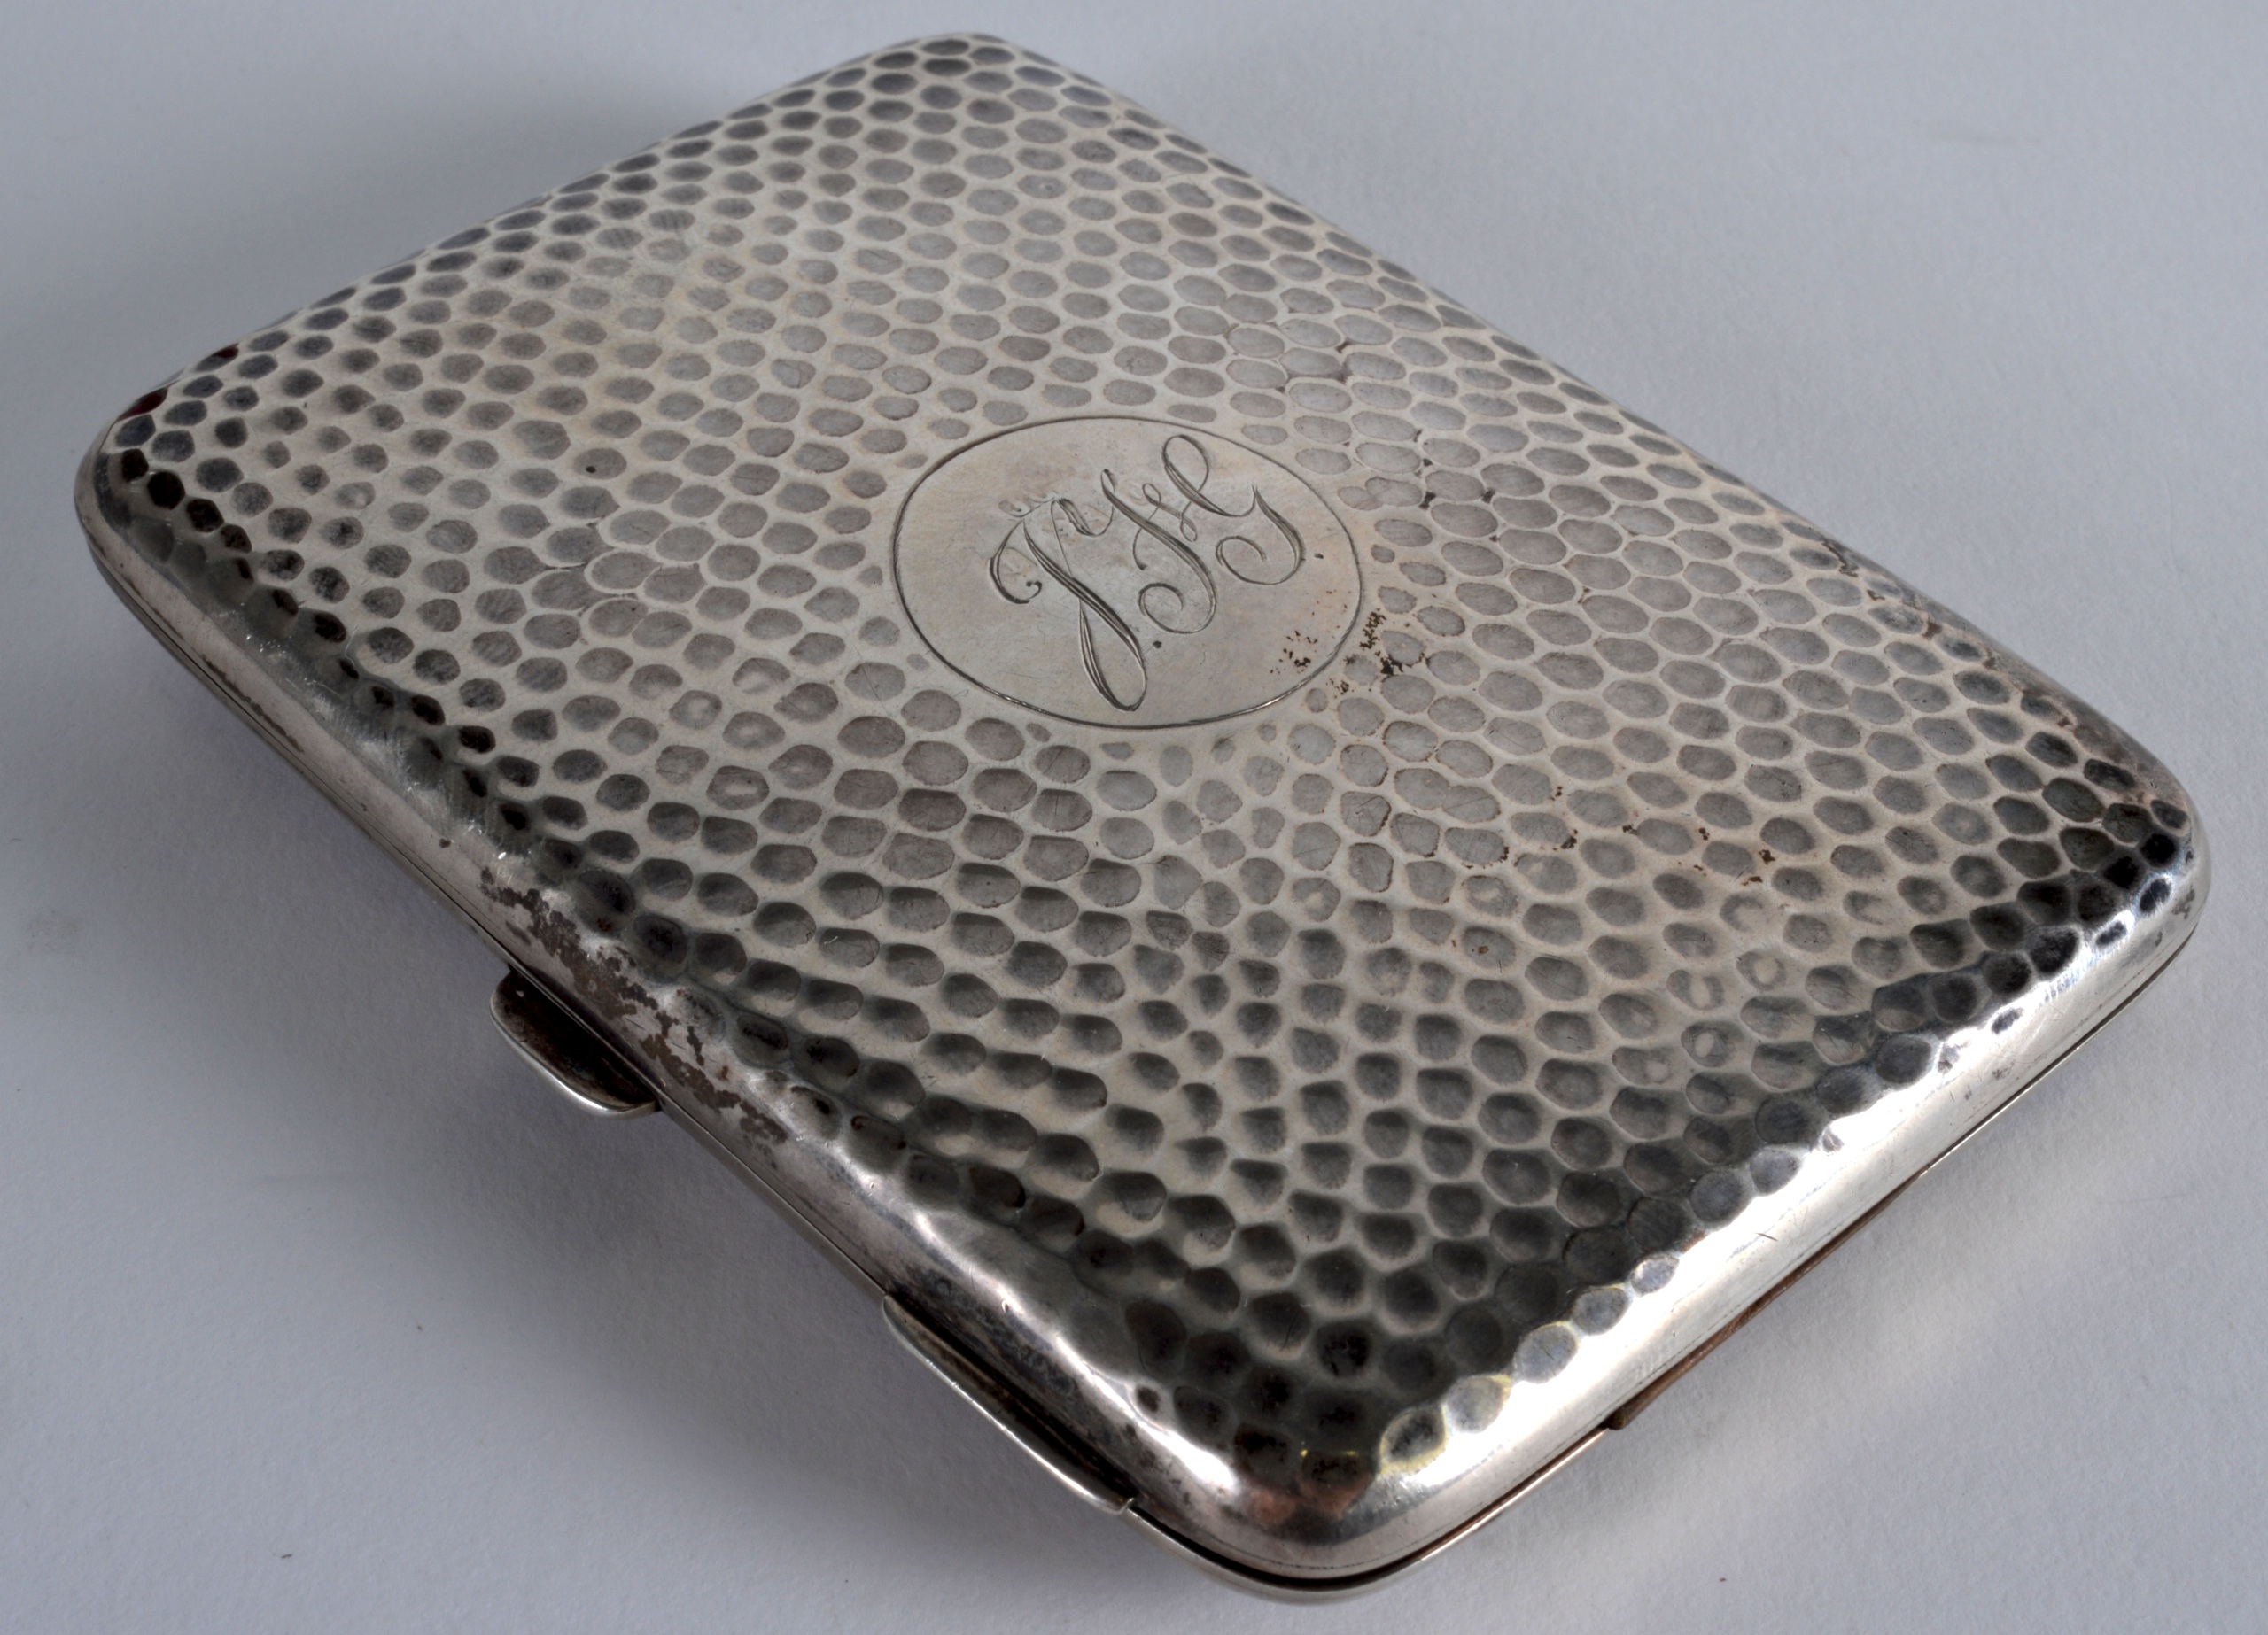 AN EDWARDIAN HAMMERED SILVER CALLING CARD CASE C1920 with central monogram. 4.25ins wide.